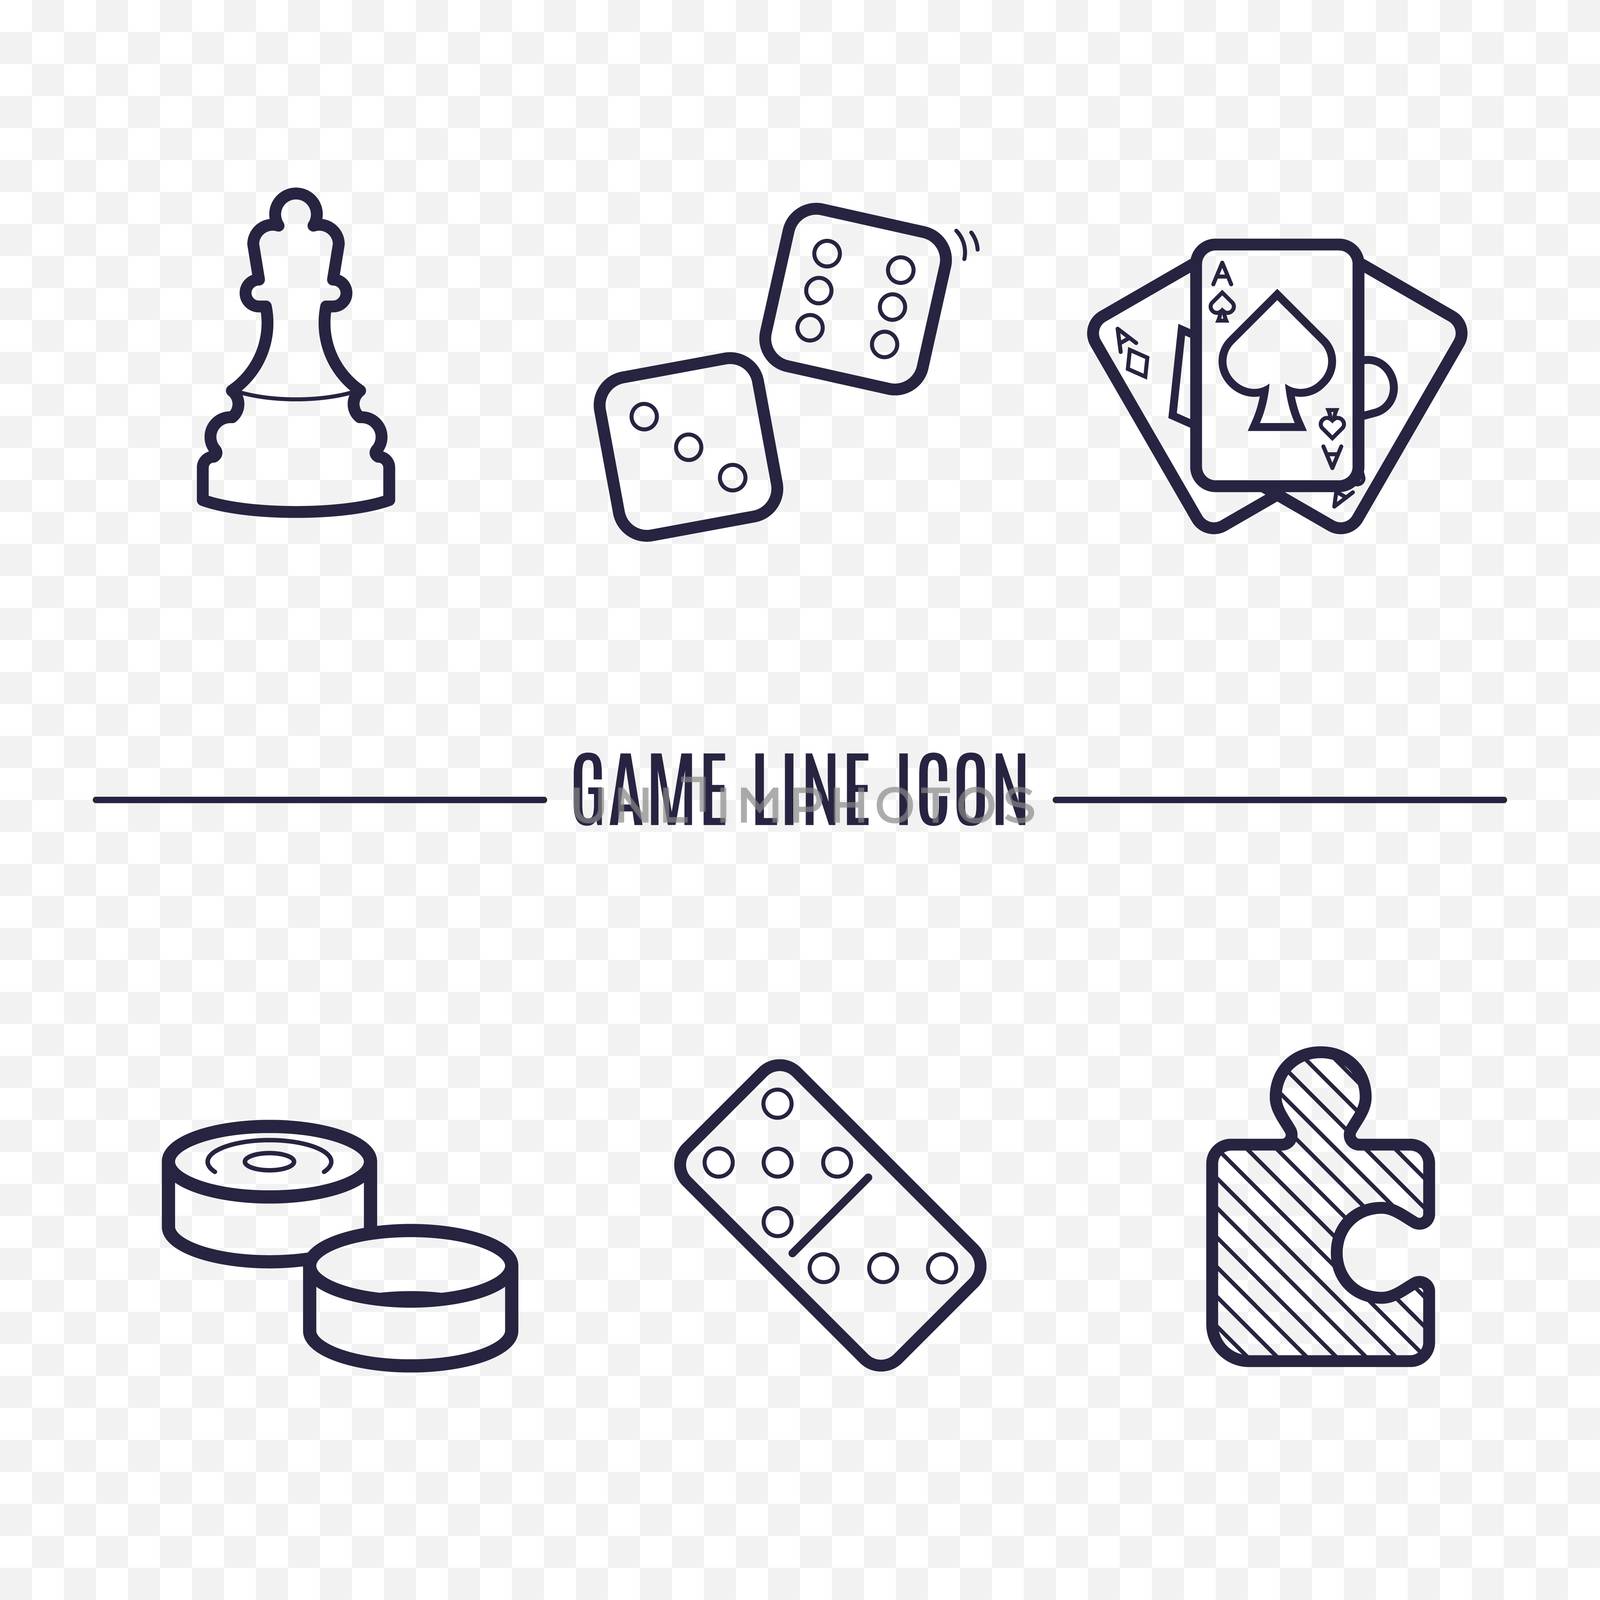 Games linear icons. Chess, dice, cards, checkers and other board games. Game thin linear signs. Outline concept for websites, infographic, mobile applications. by Elena_Garder